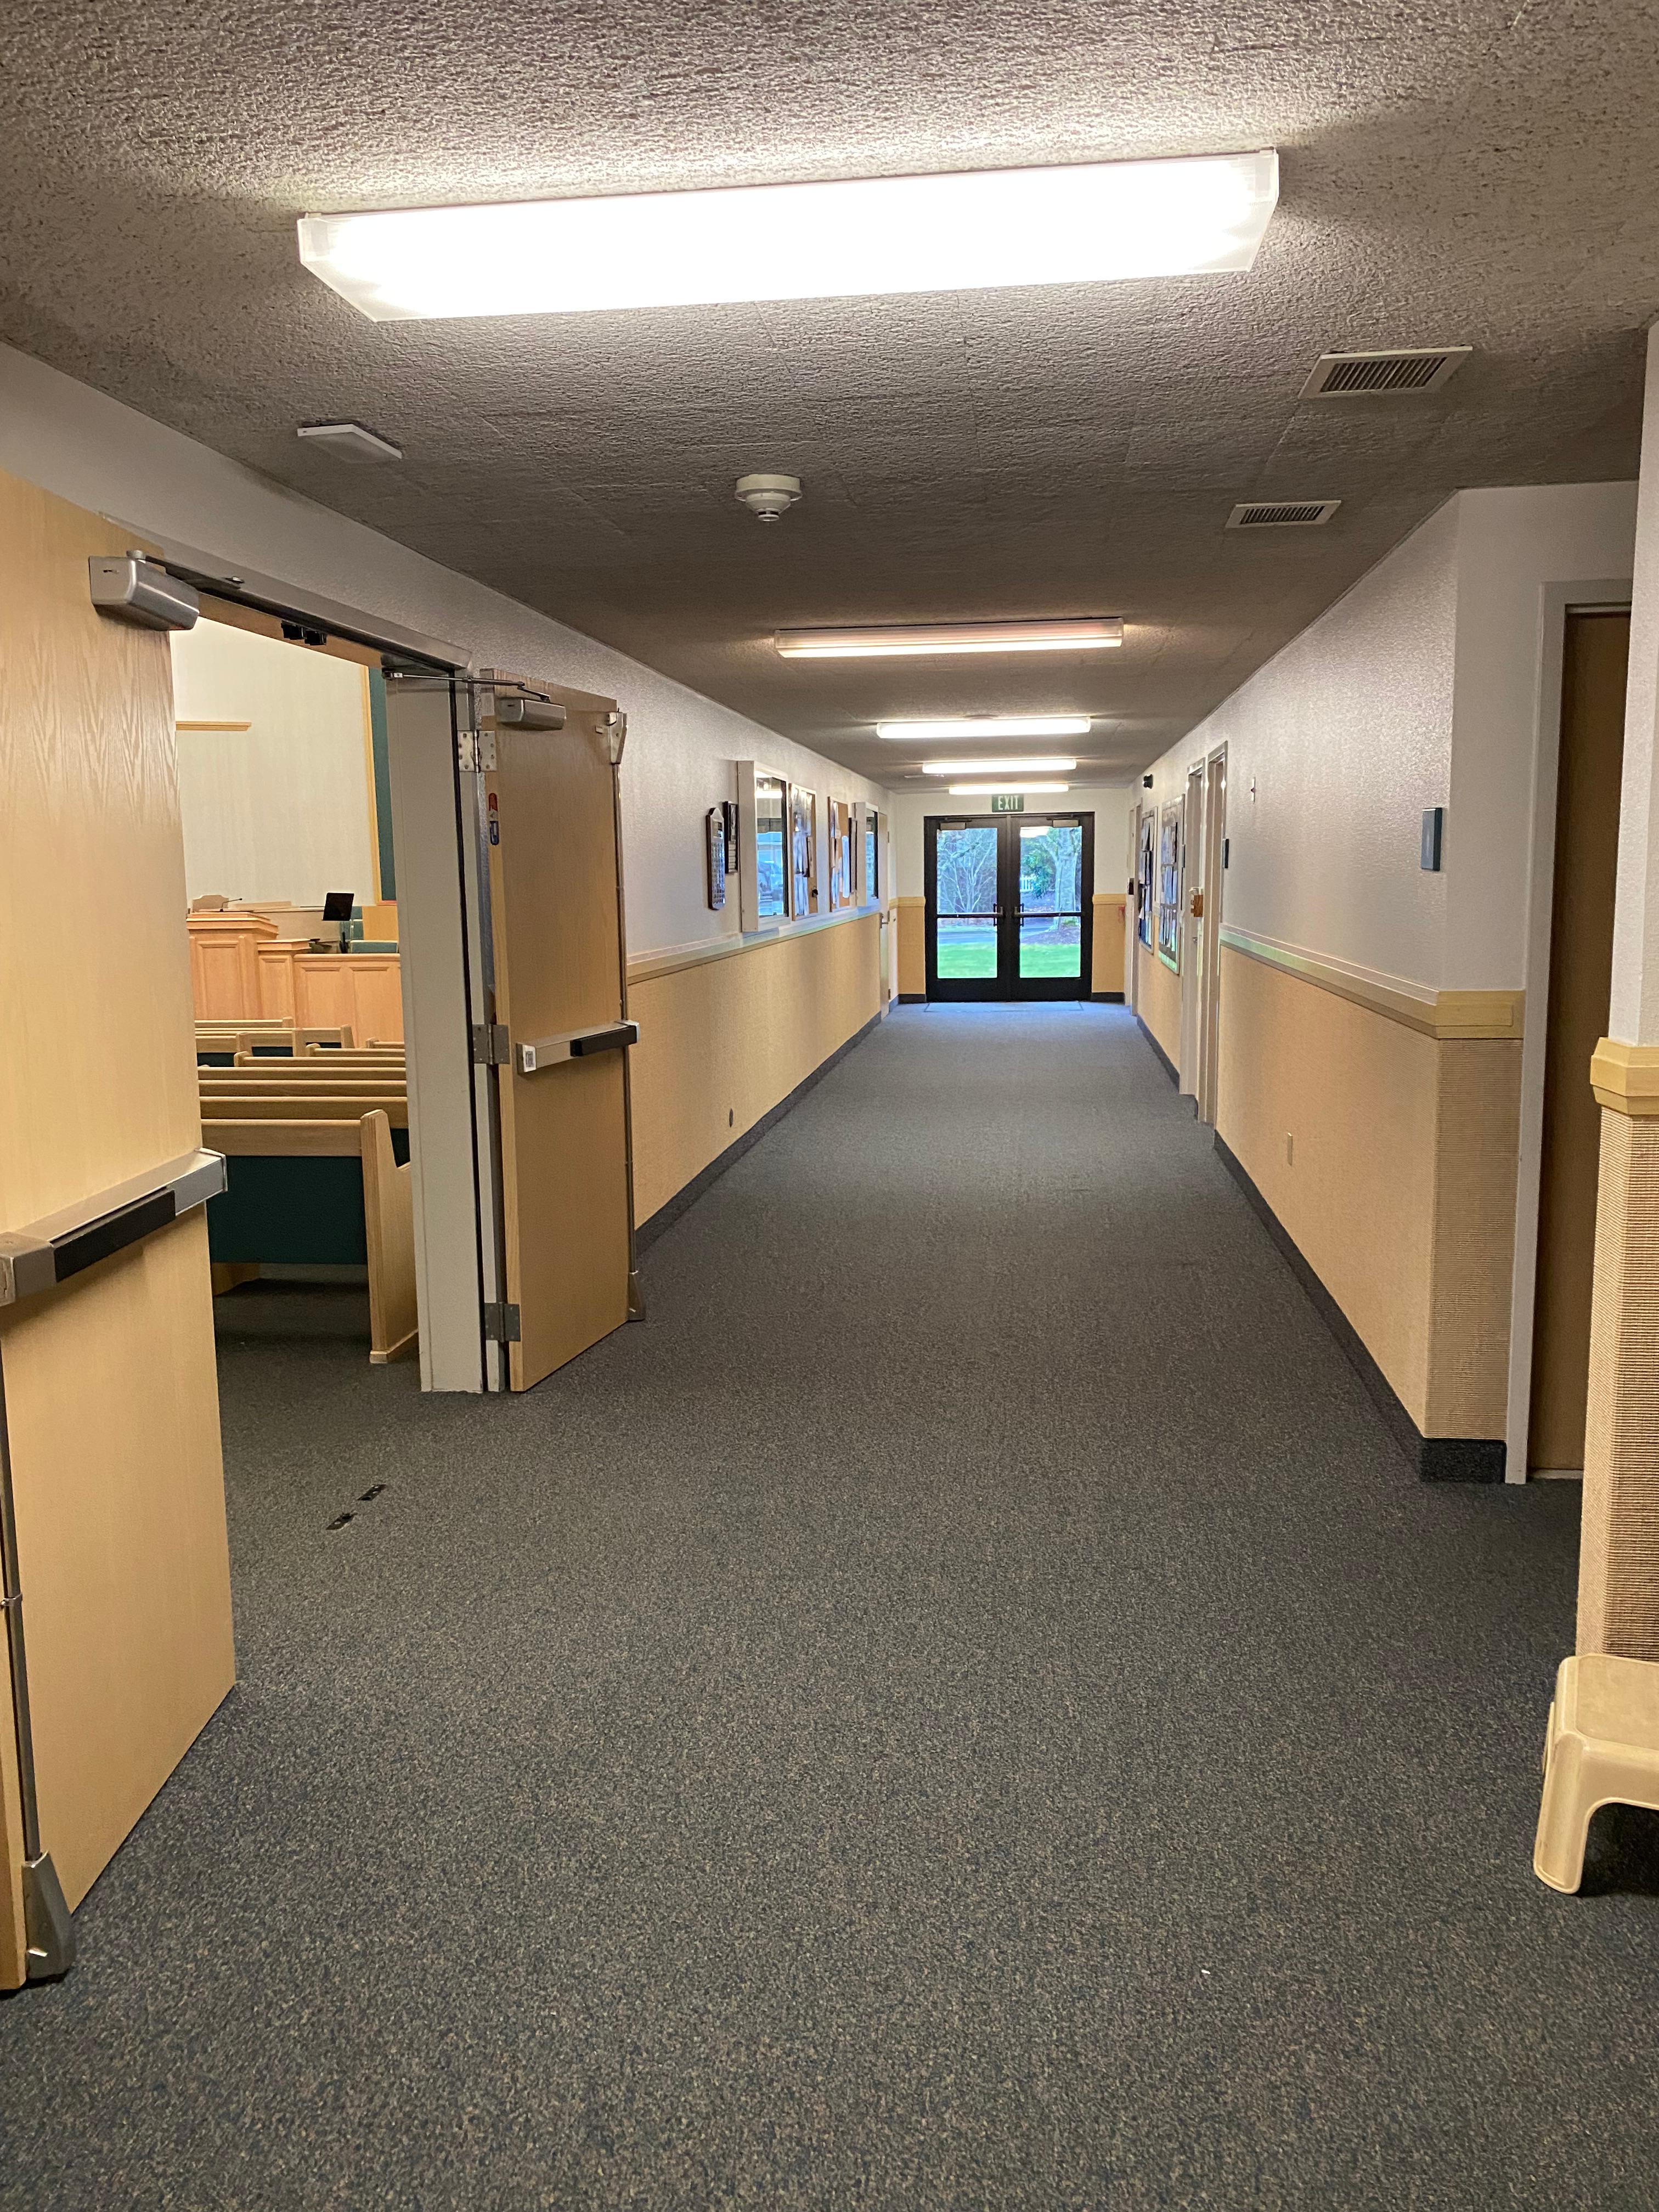 A hallway leading to classrooms, bathrooms, etc.